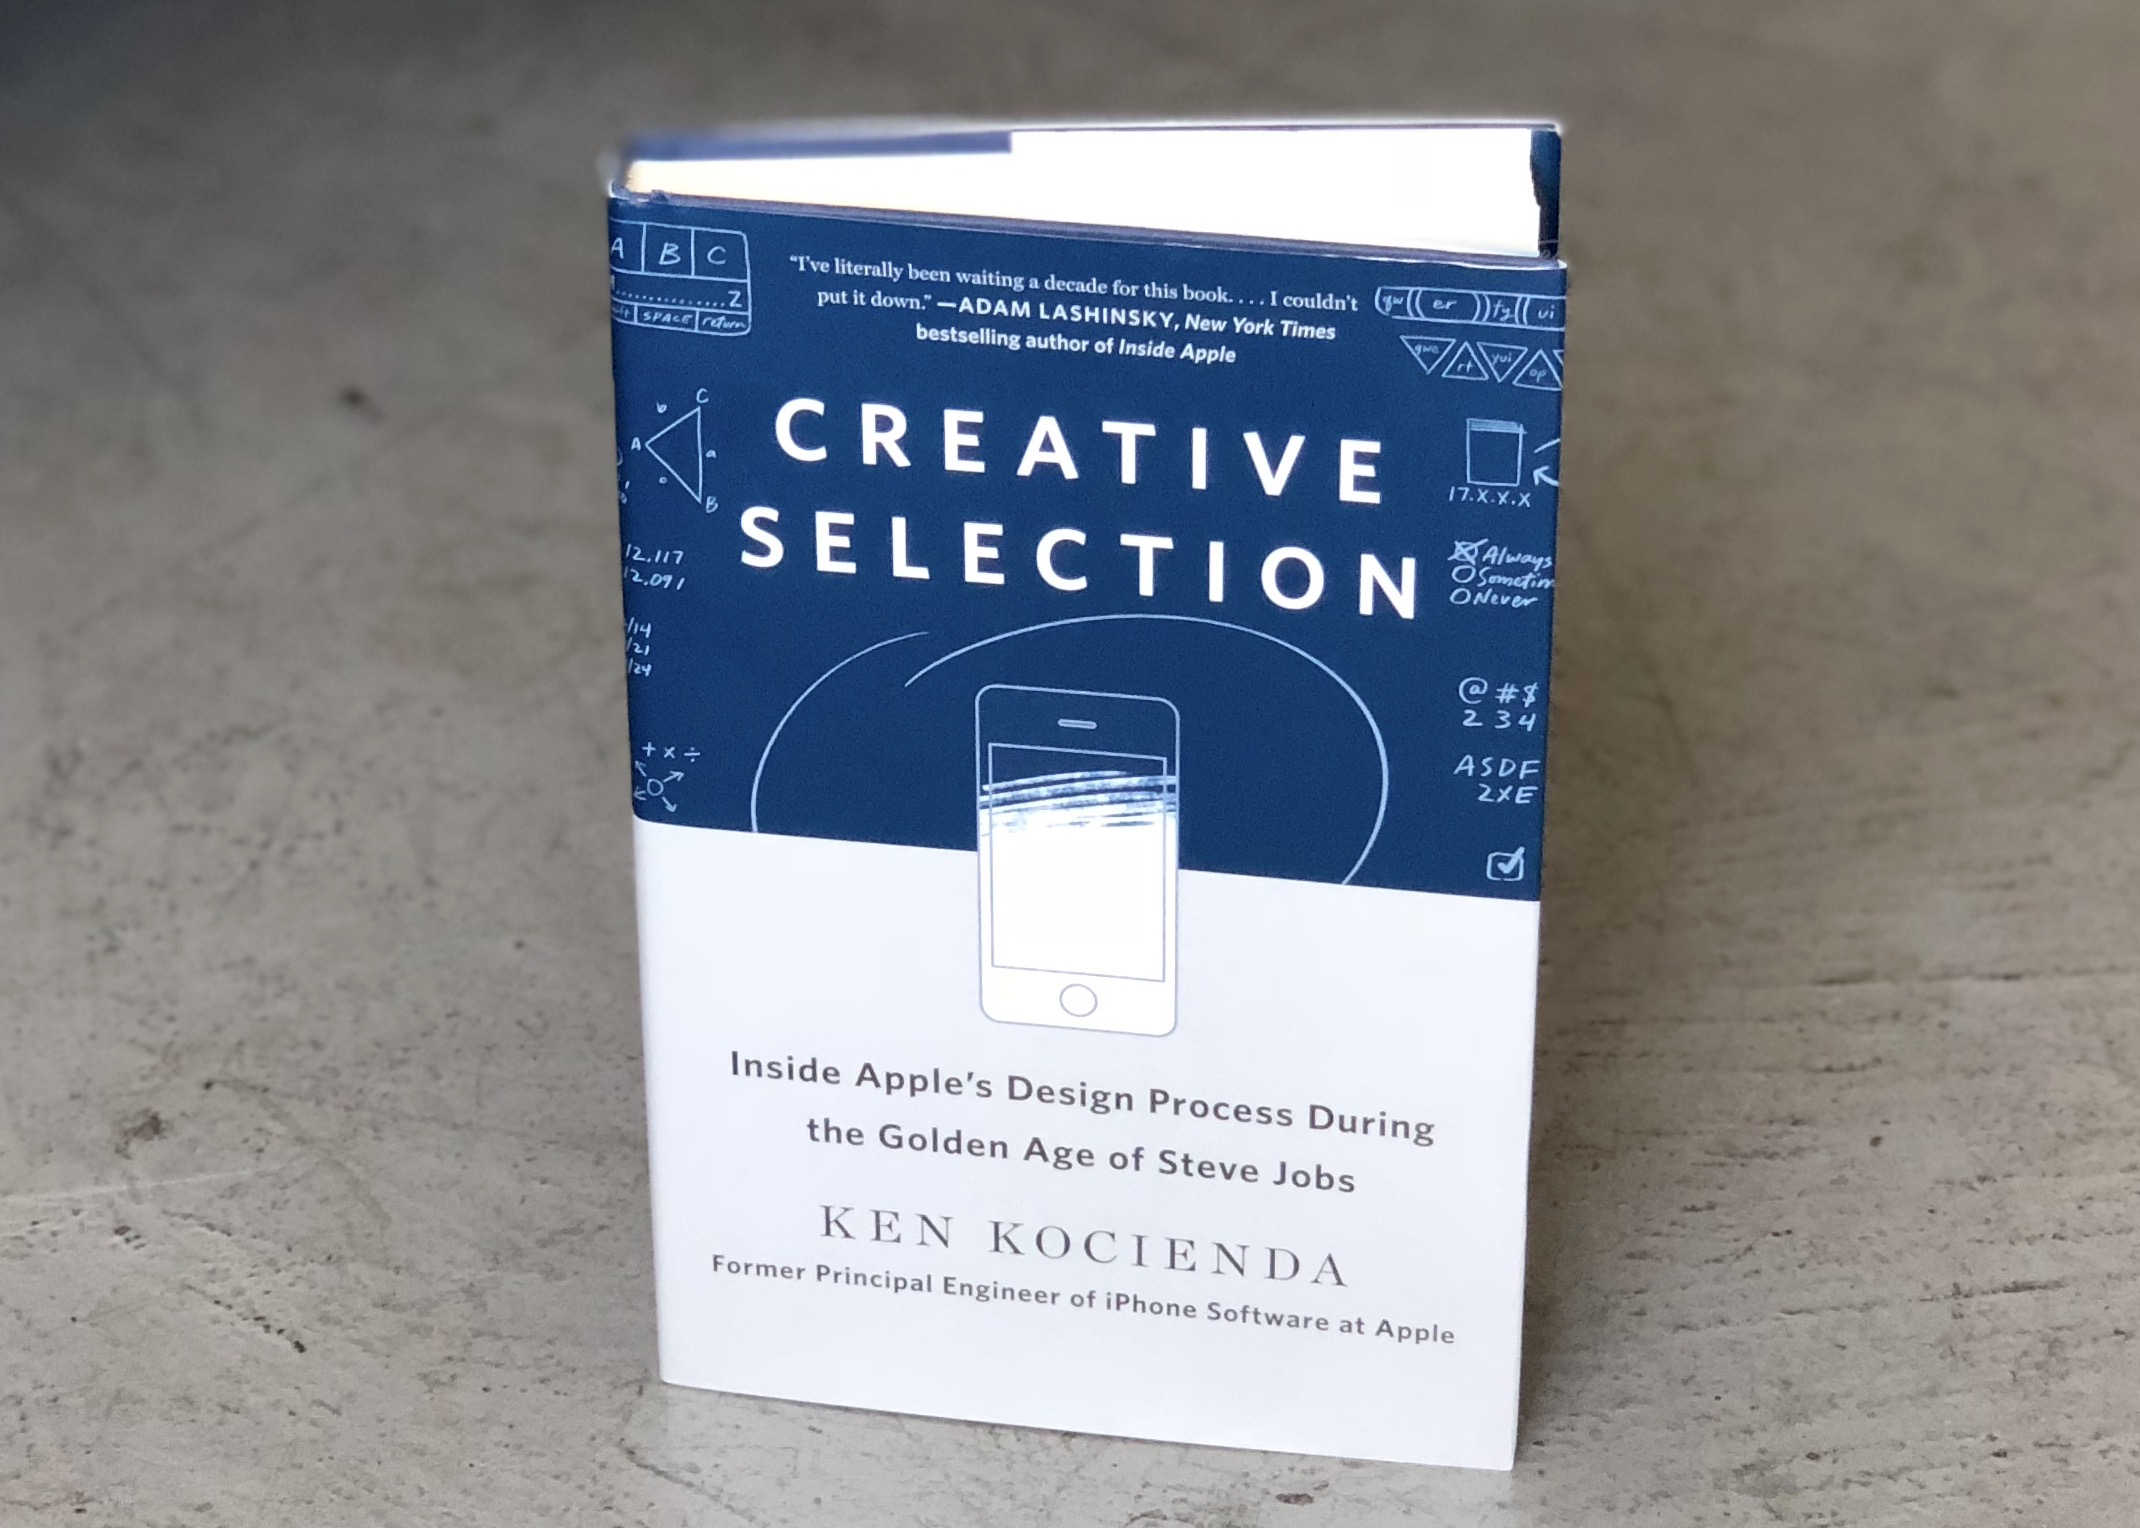 Ken Kocienda's book Creative Selection is an insider's account of how Apple makes great software.